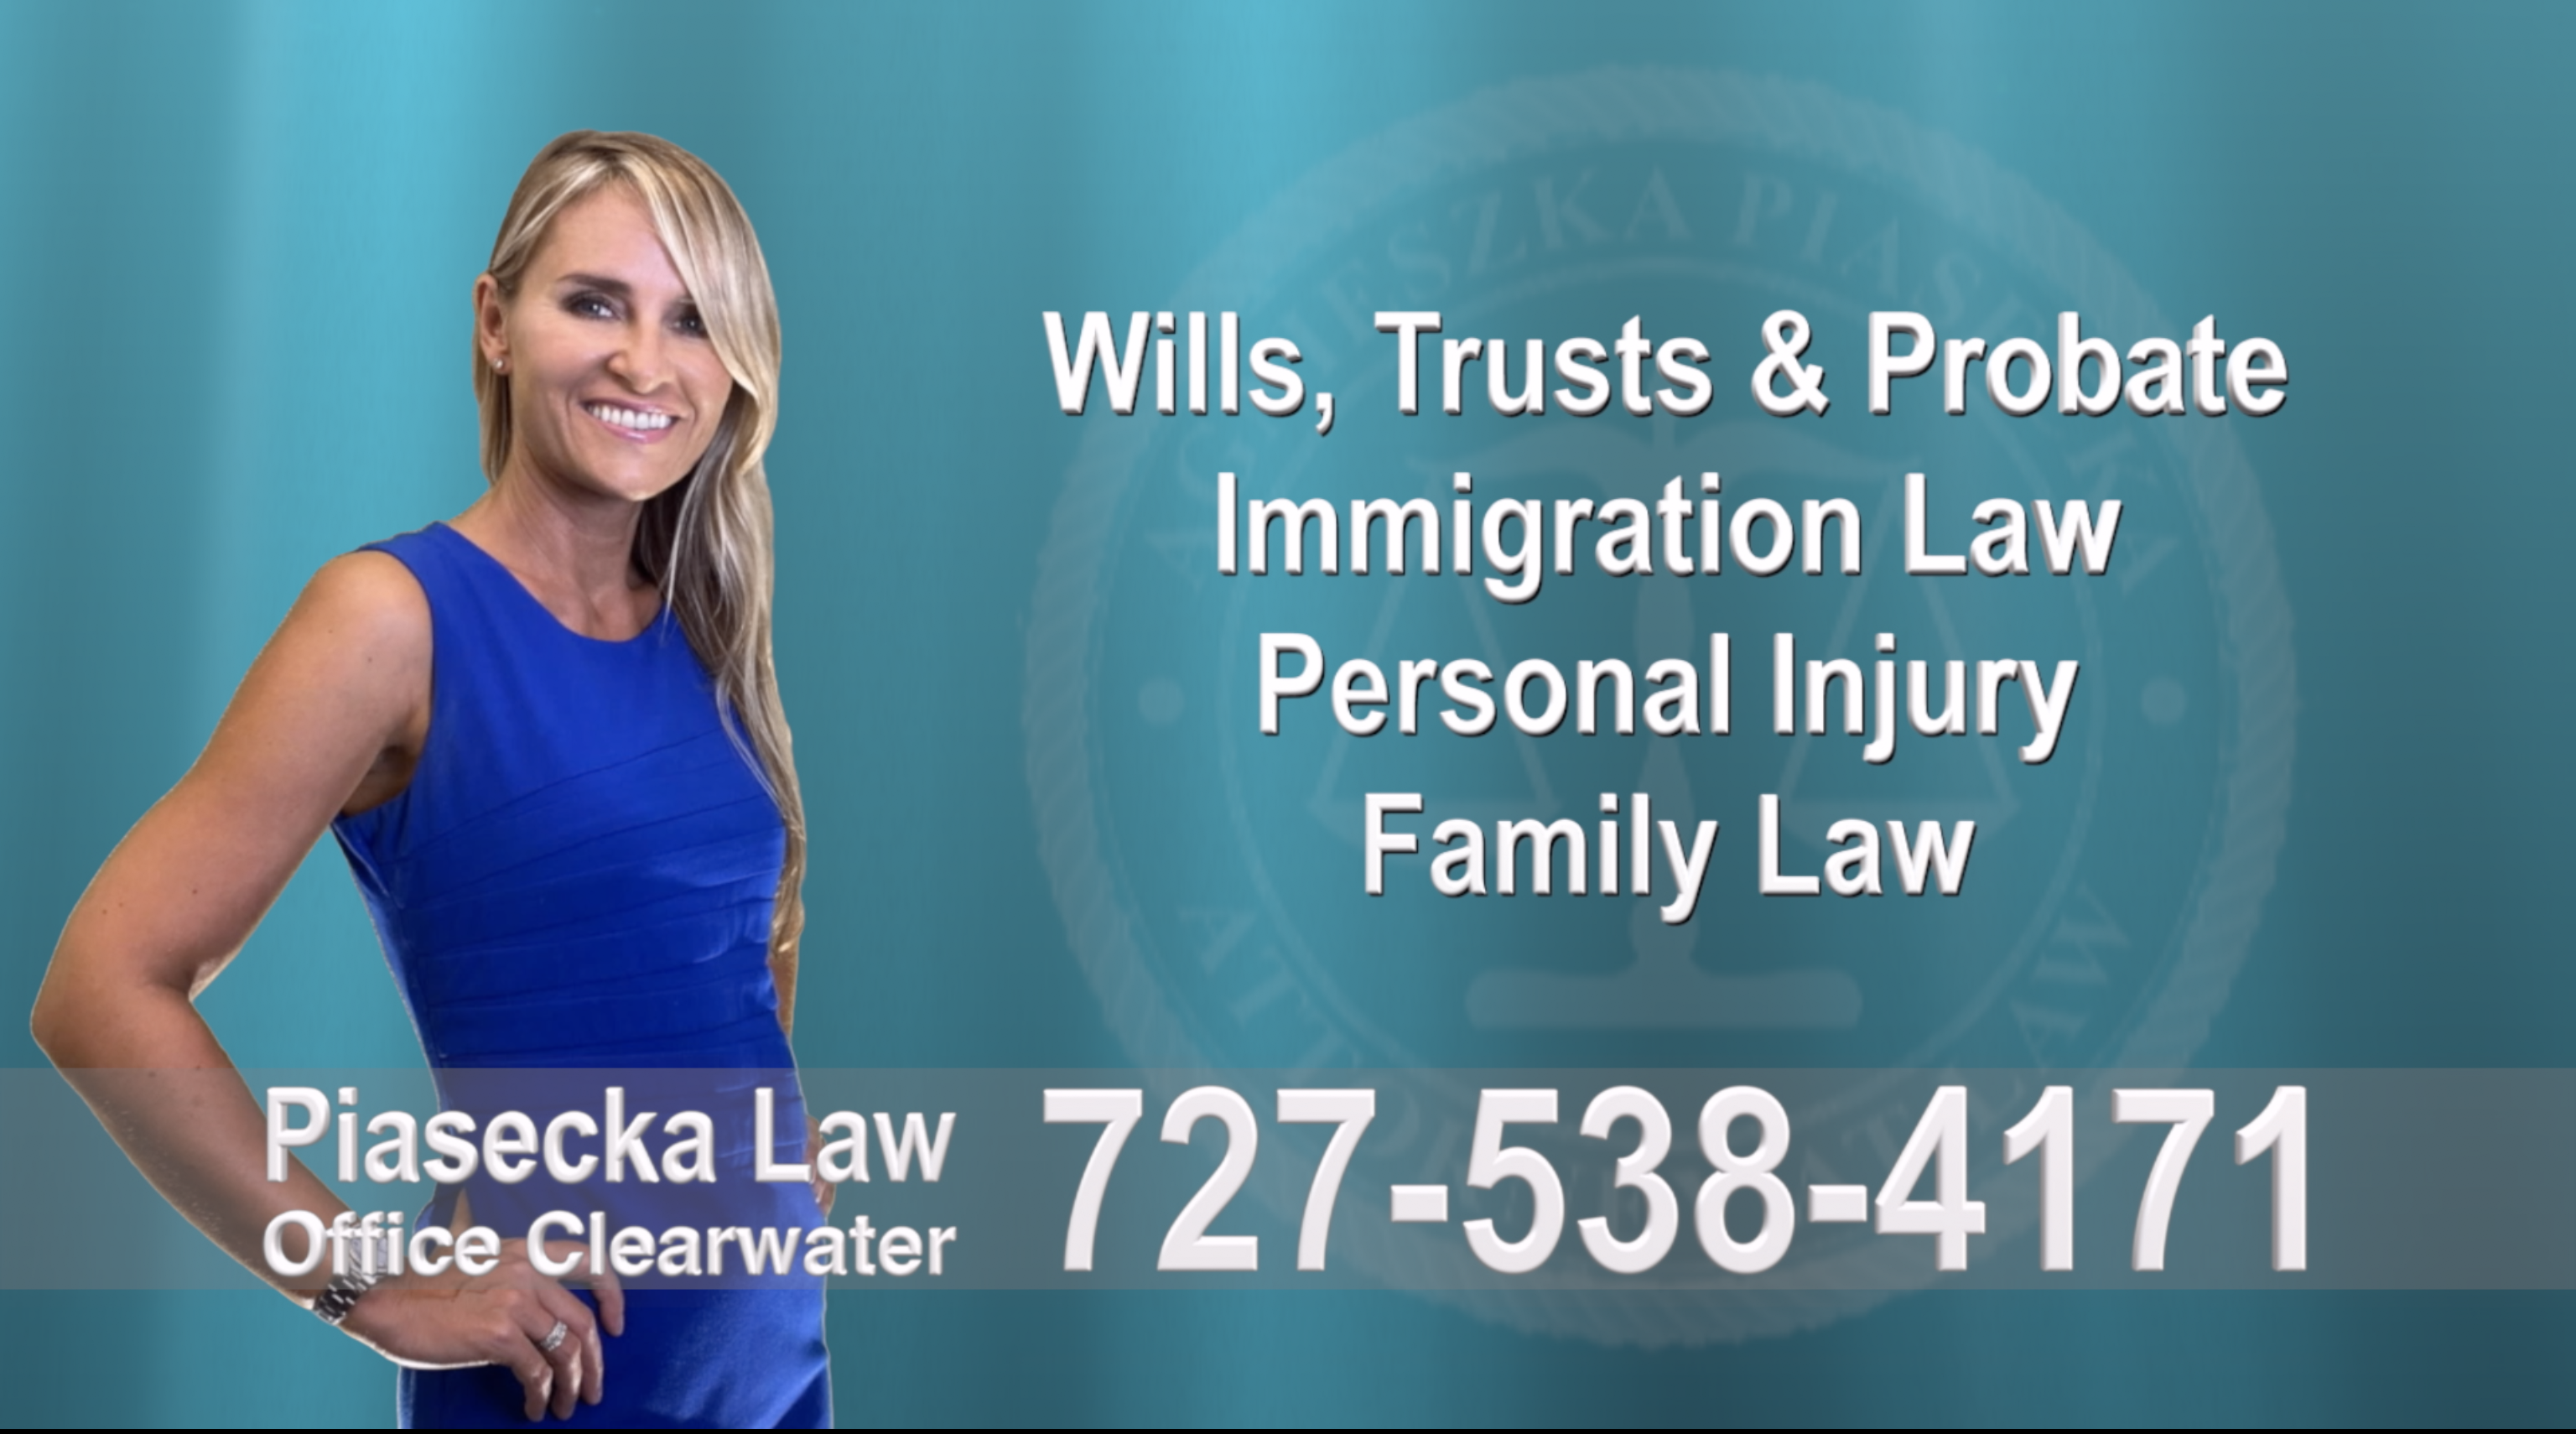 Divorce Lawyer Clearwater Florida Polish, Attorneys, Lawyers, Florida, Polish, speaking, Wills, Trusts, Family Law, Personal Injury, Immigration 1